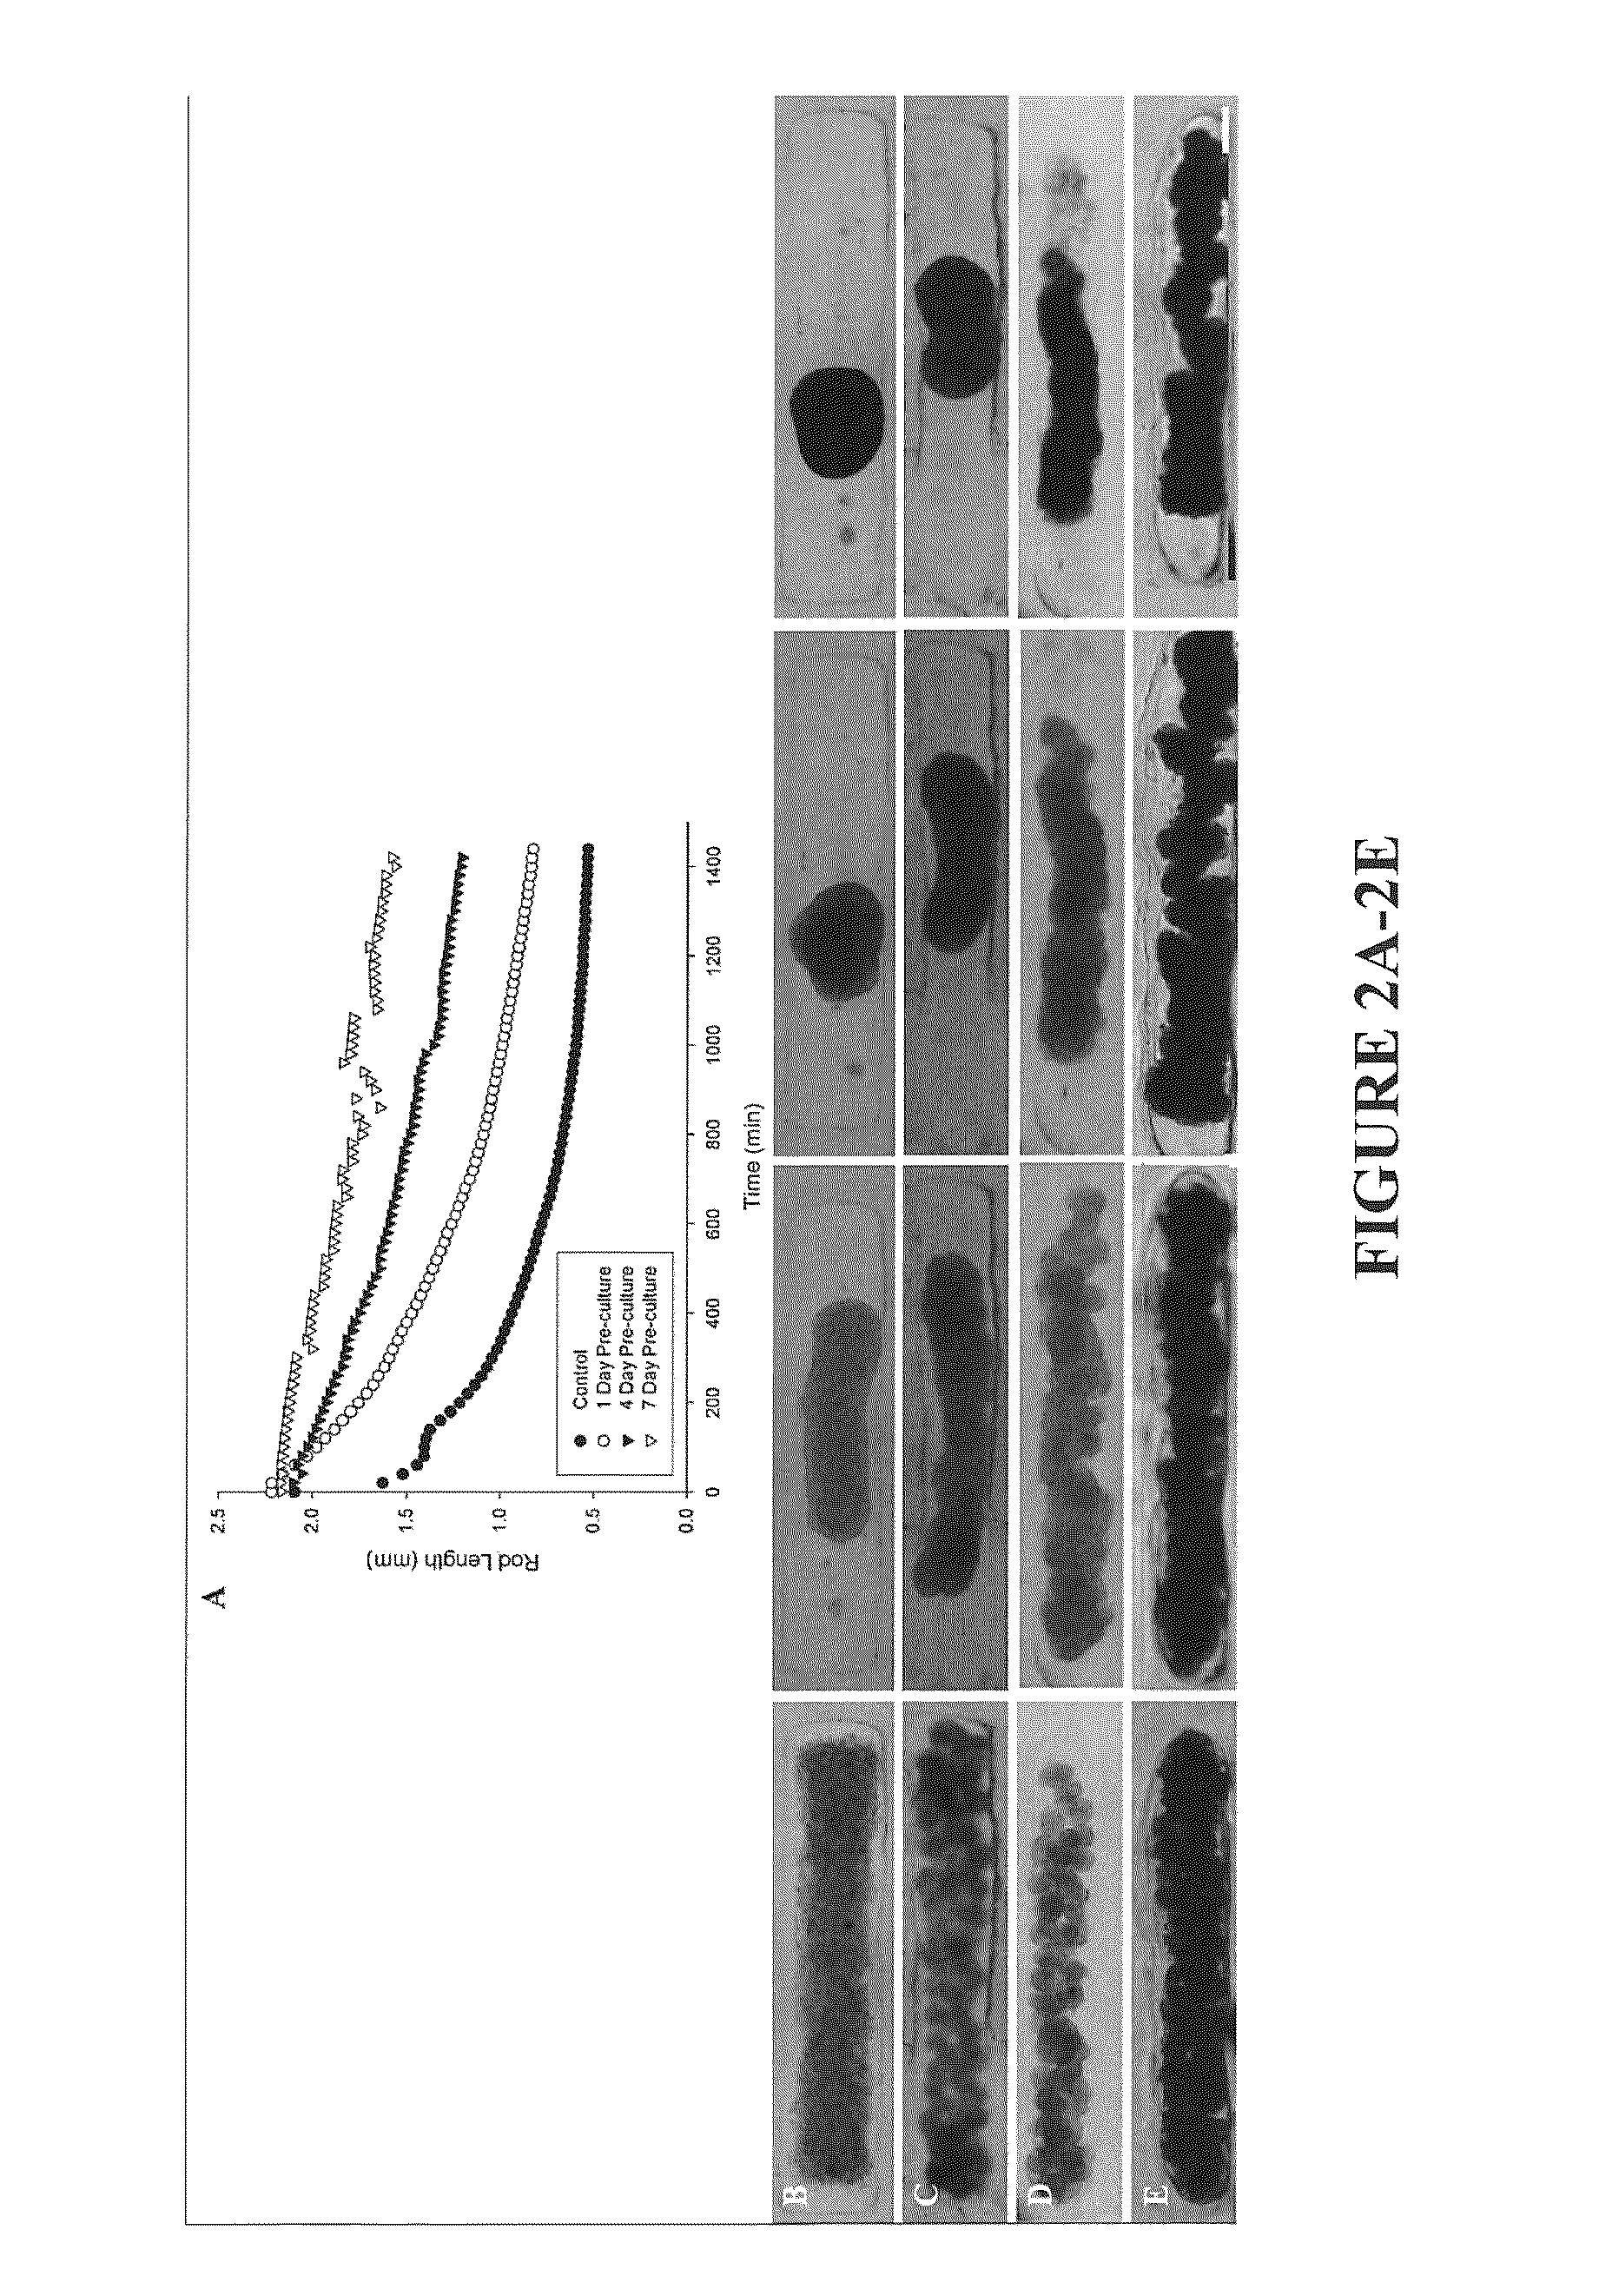 Assays and methods for fusing cell aggregates to form proto-tissues